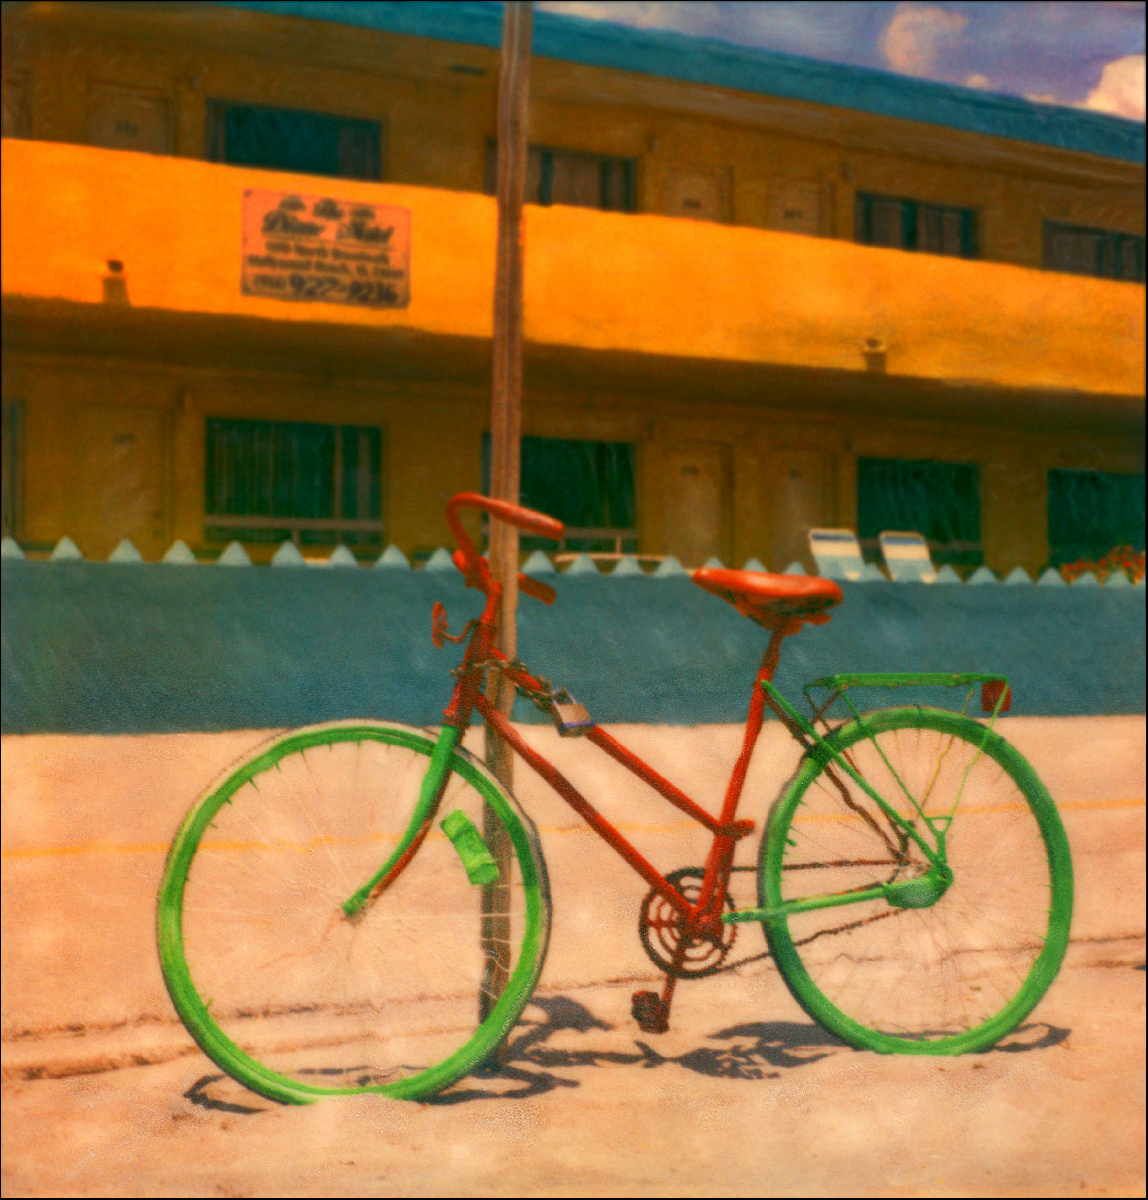 "Painted Bike on Hollywood Beach" <br>Red and Green Bike on Sand, Hollywood Beach, FL